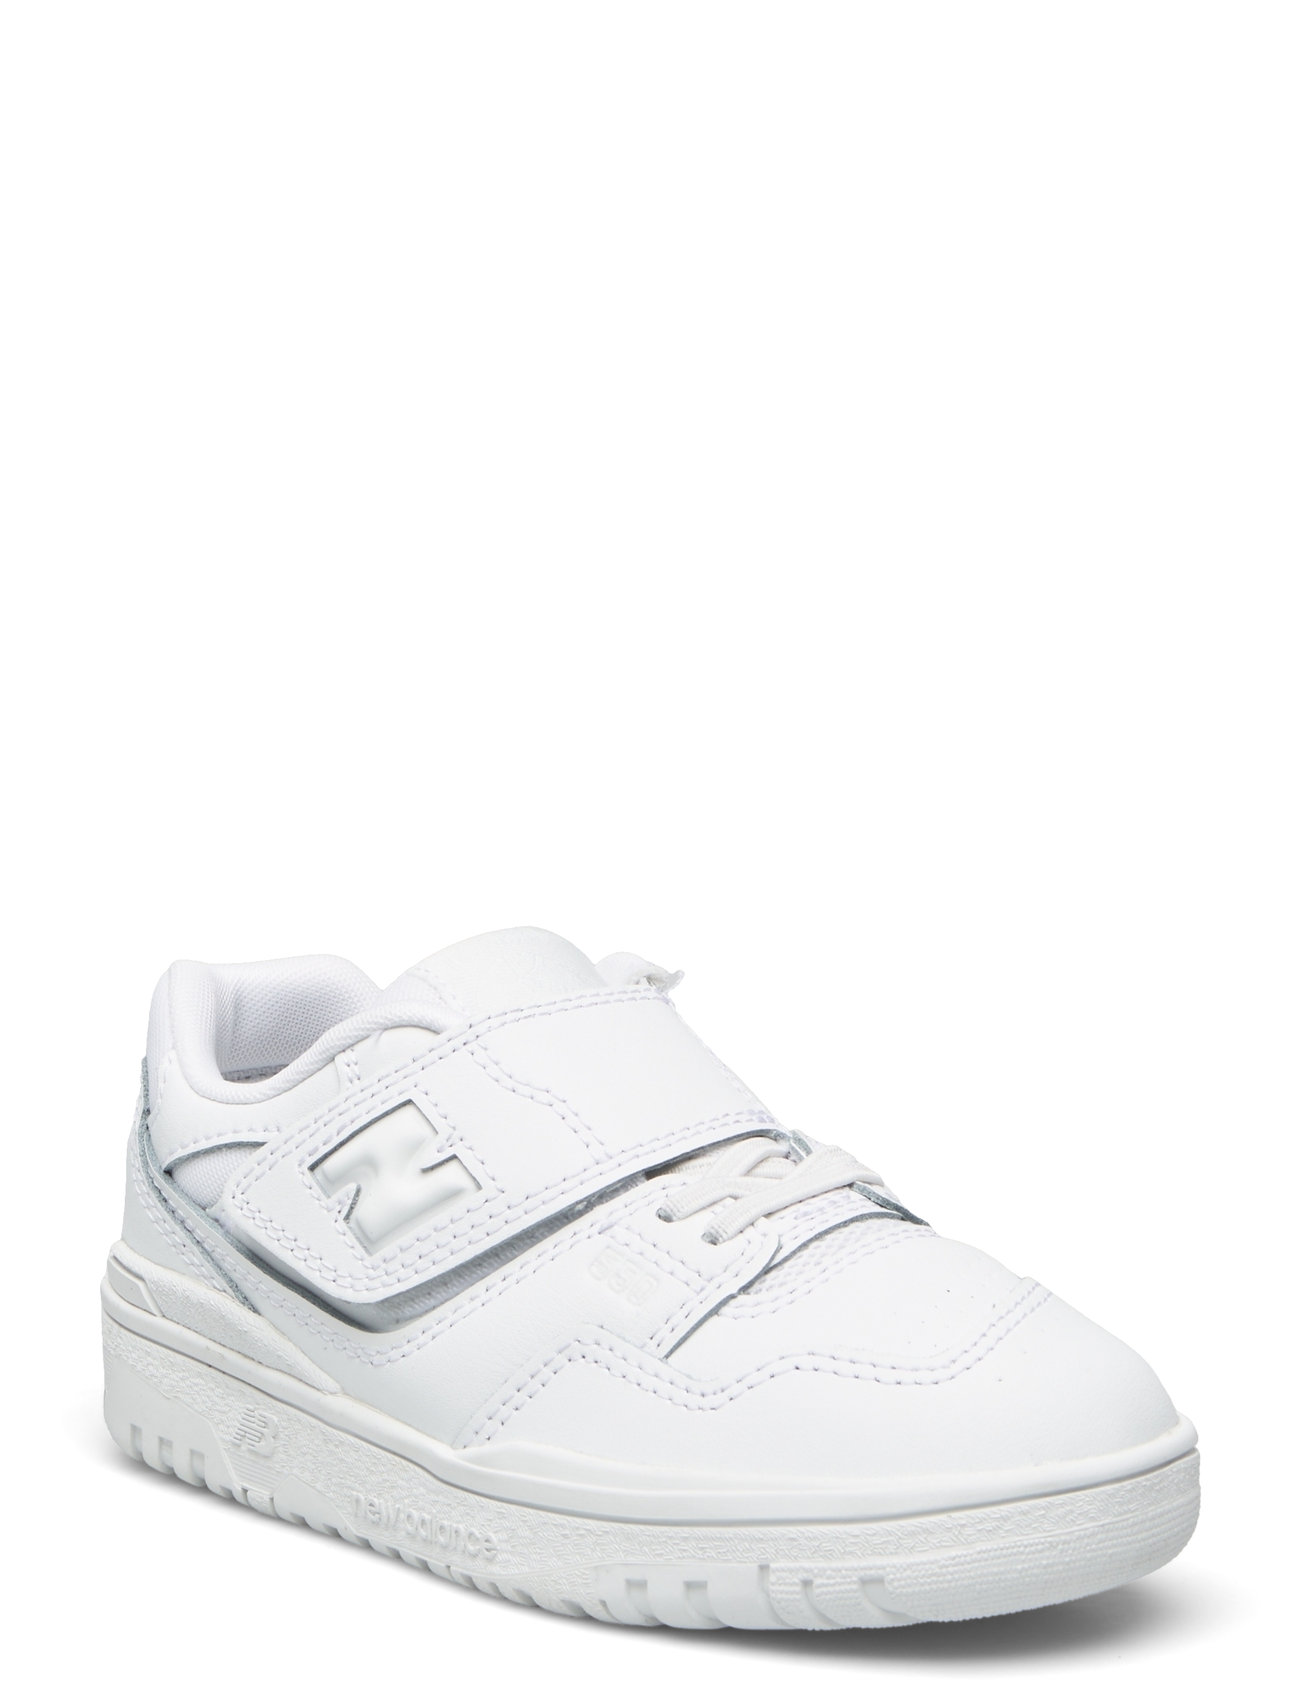 New Balance 550 Kids Bungee Lace With Hook & Loop Top Strap Sport Sneakers Low-top Sneakers White New Balance